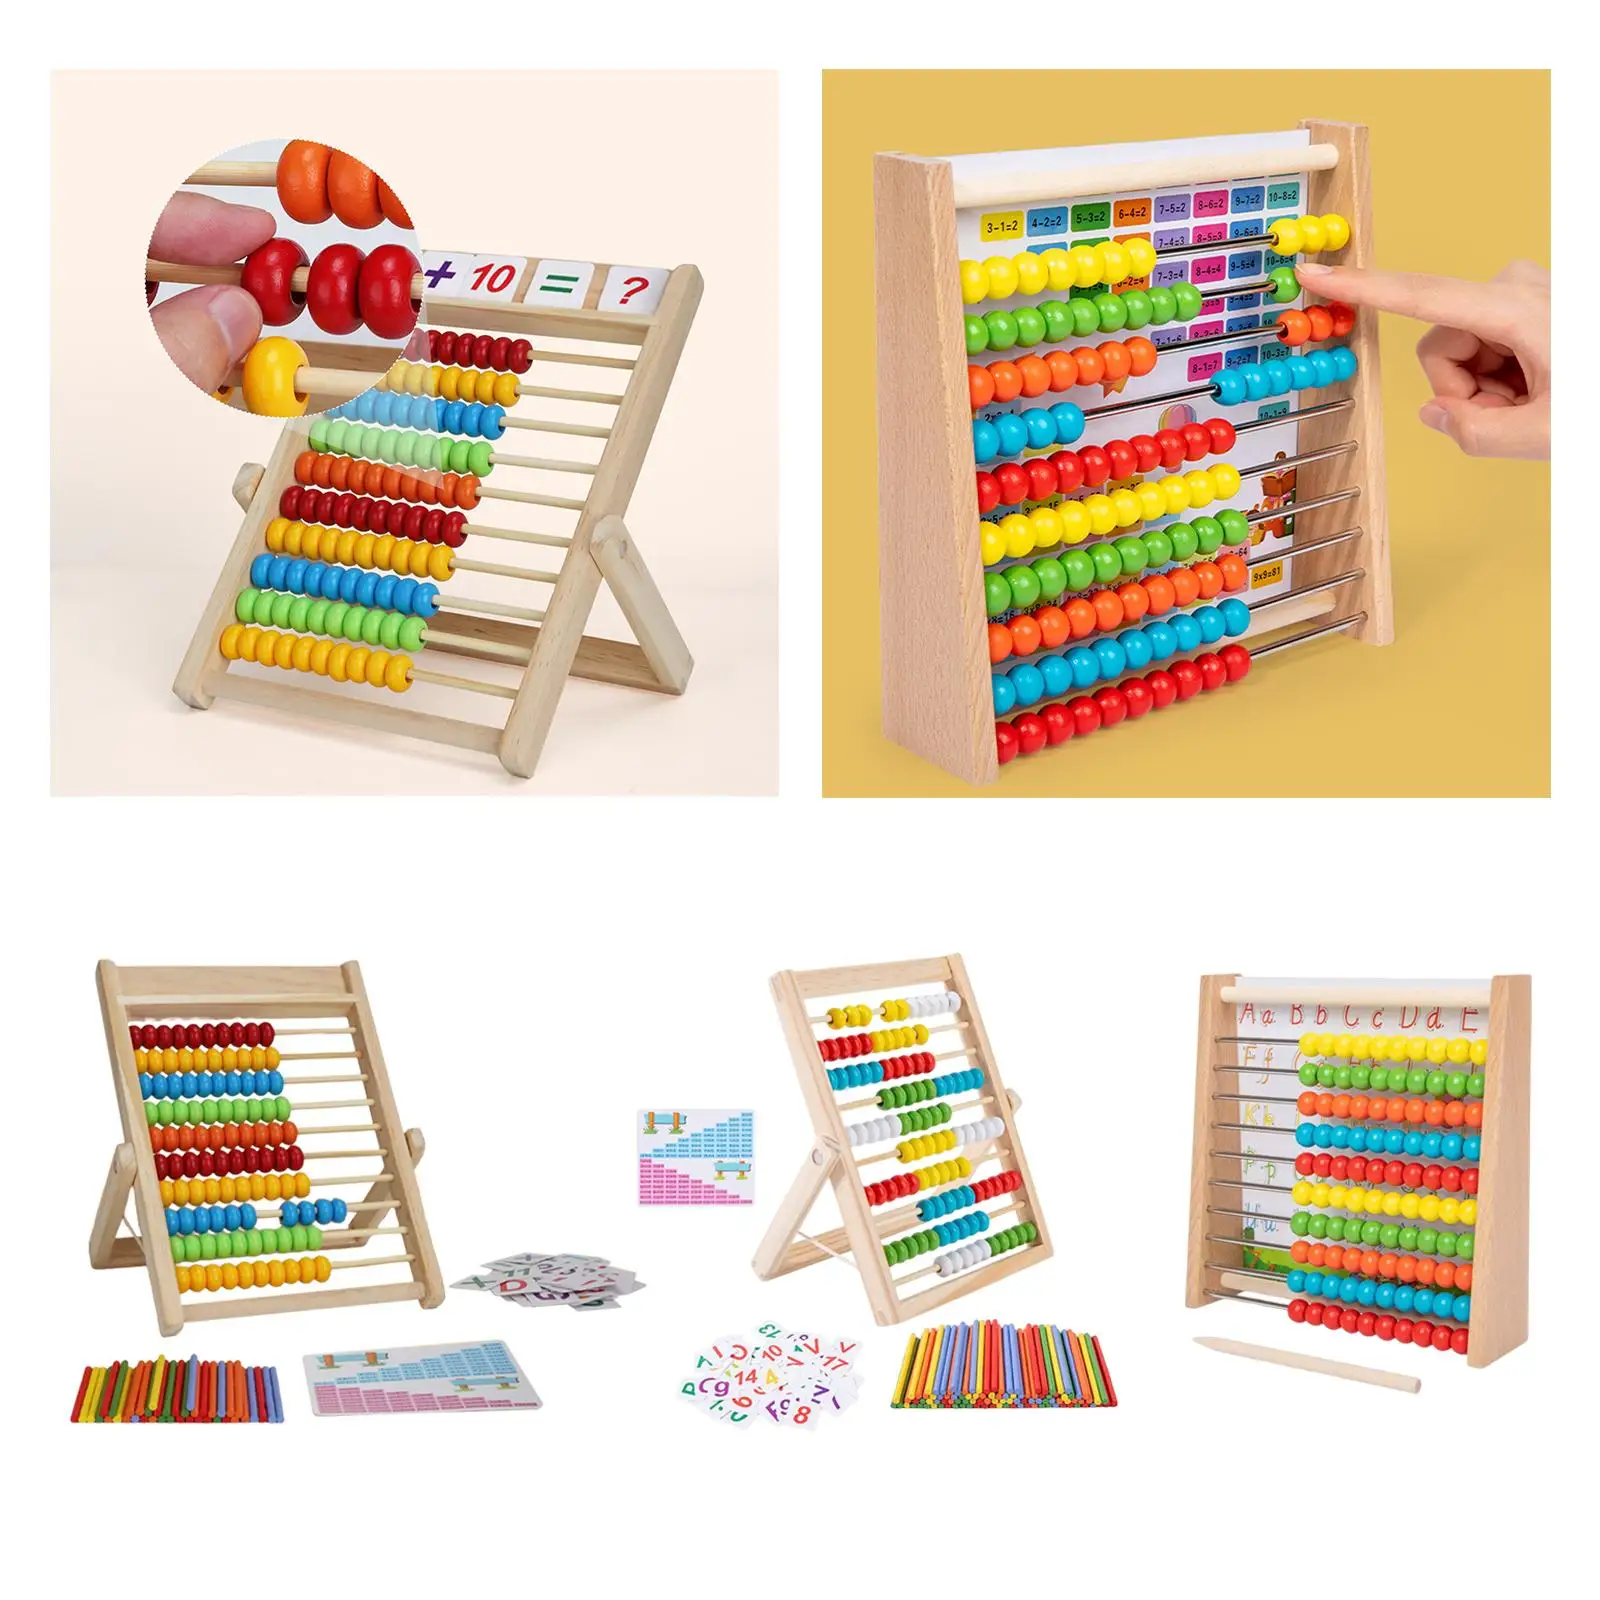 Wooden Abacus Classic Counting Tool Counting Frame Educational Toy Addition and Subtraction Kids Learning Math for Holiday Gifts